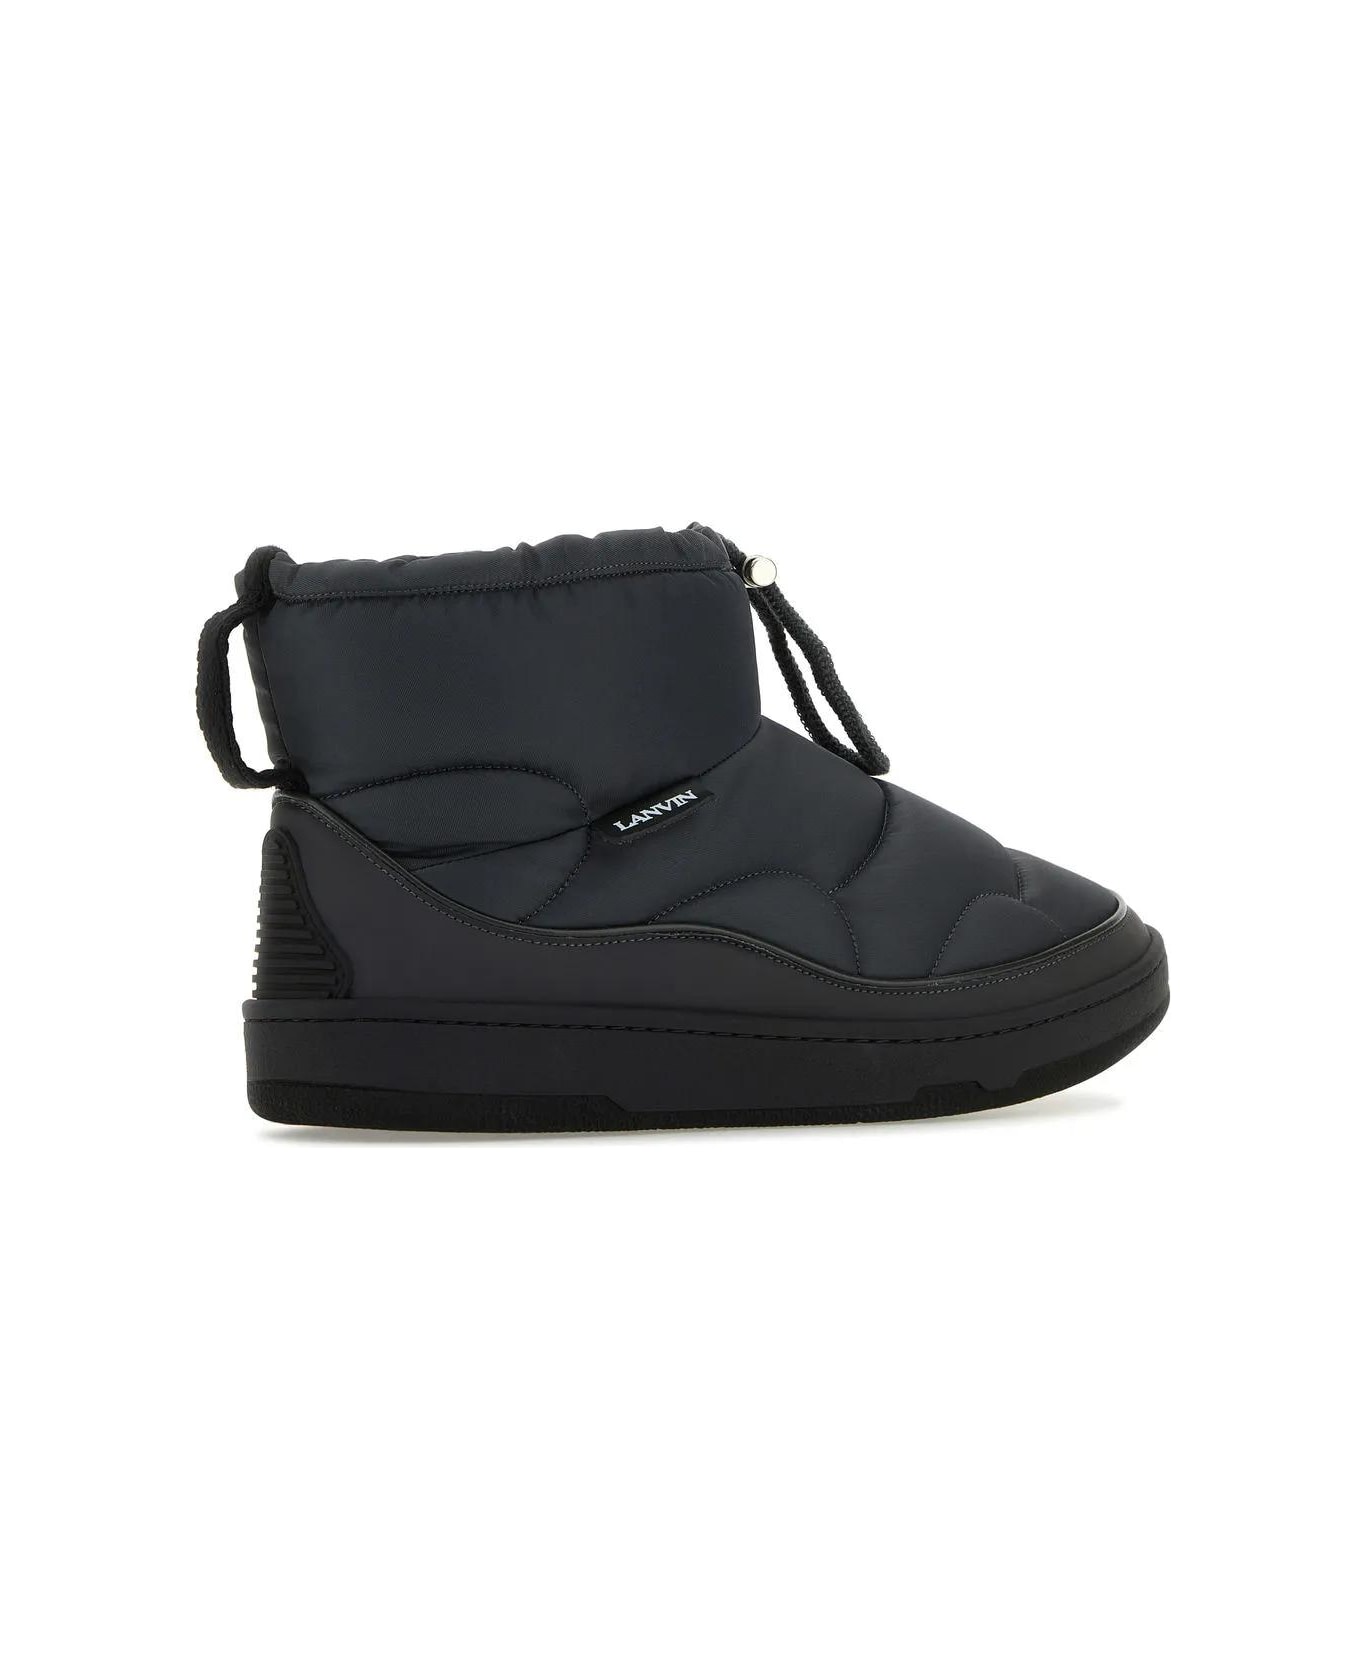 Lanvin Graphite Fabric Curb Snow Ankle Boots - LODEN ブーツ